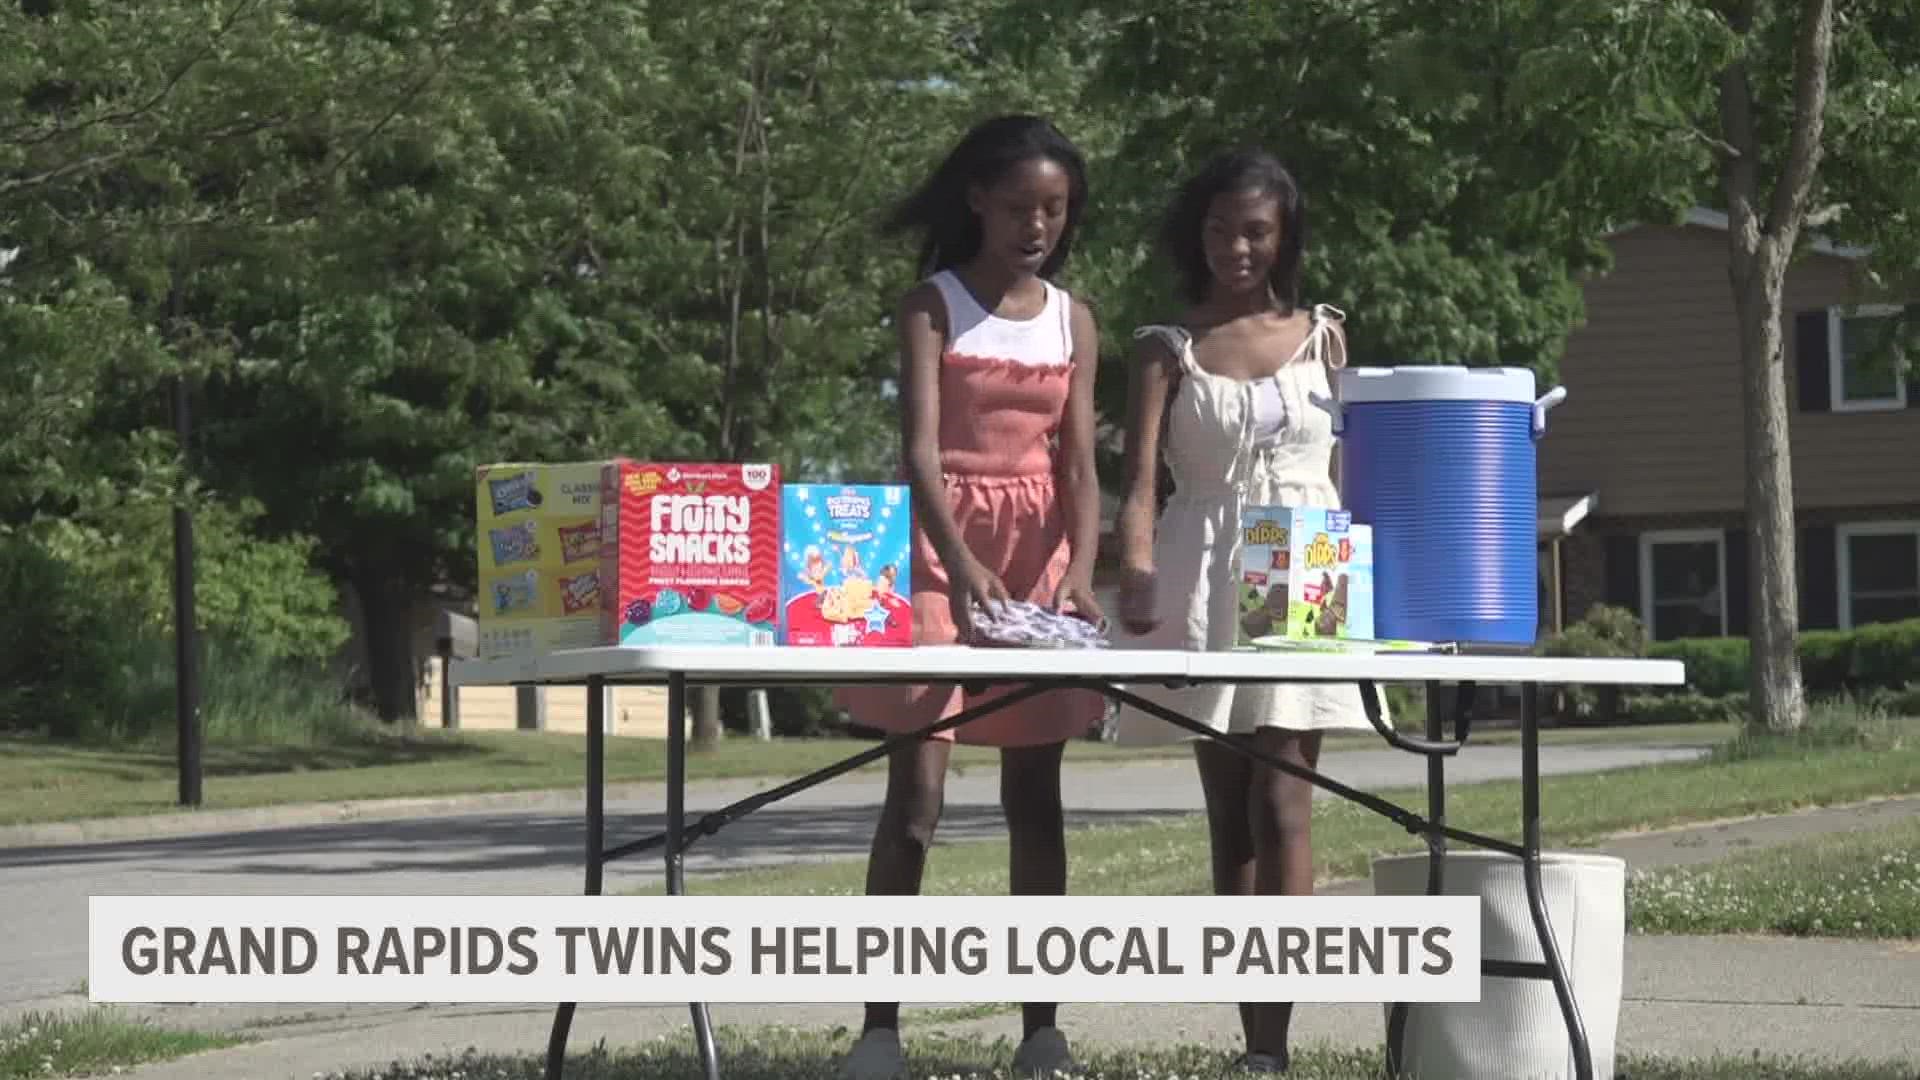 Every parent knows that summer camp for kids can be expensive, but there's no need to worry as twins from Grand Rapids come to the rescue.